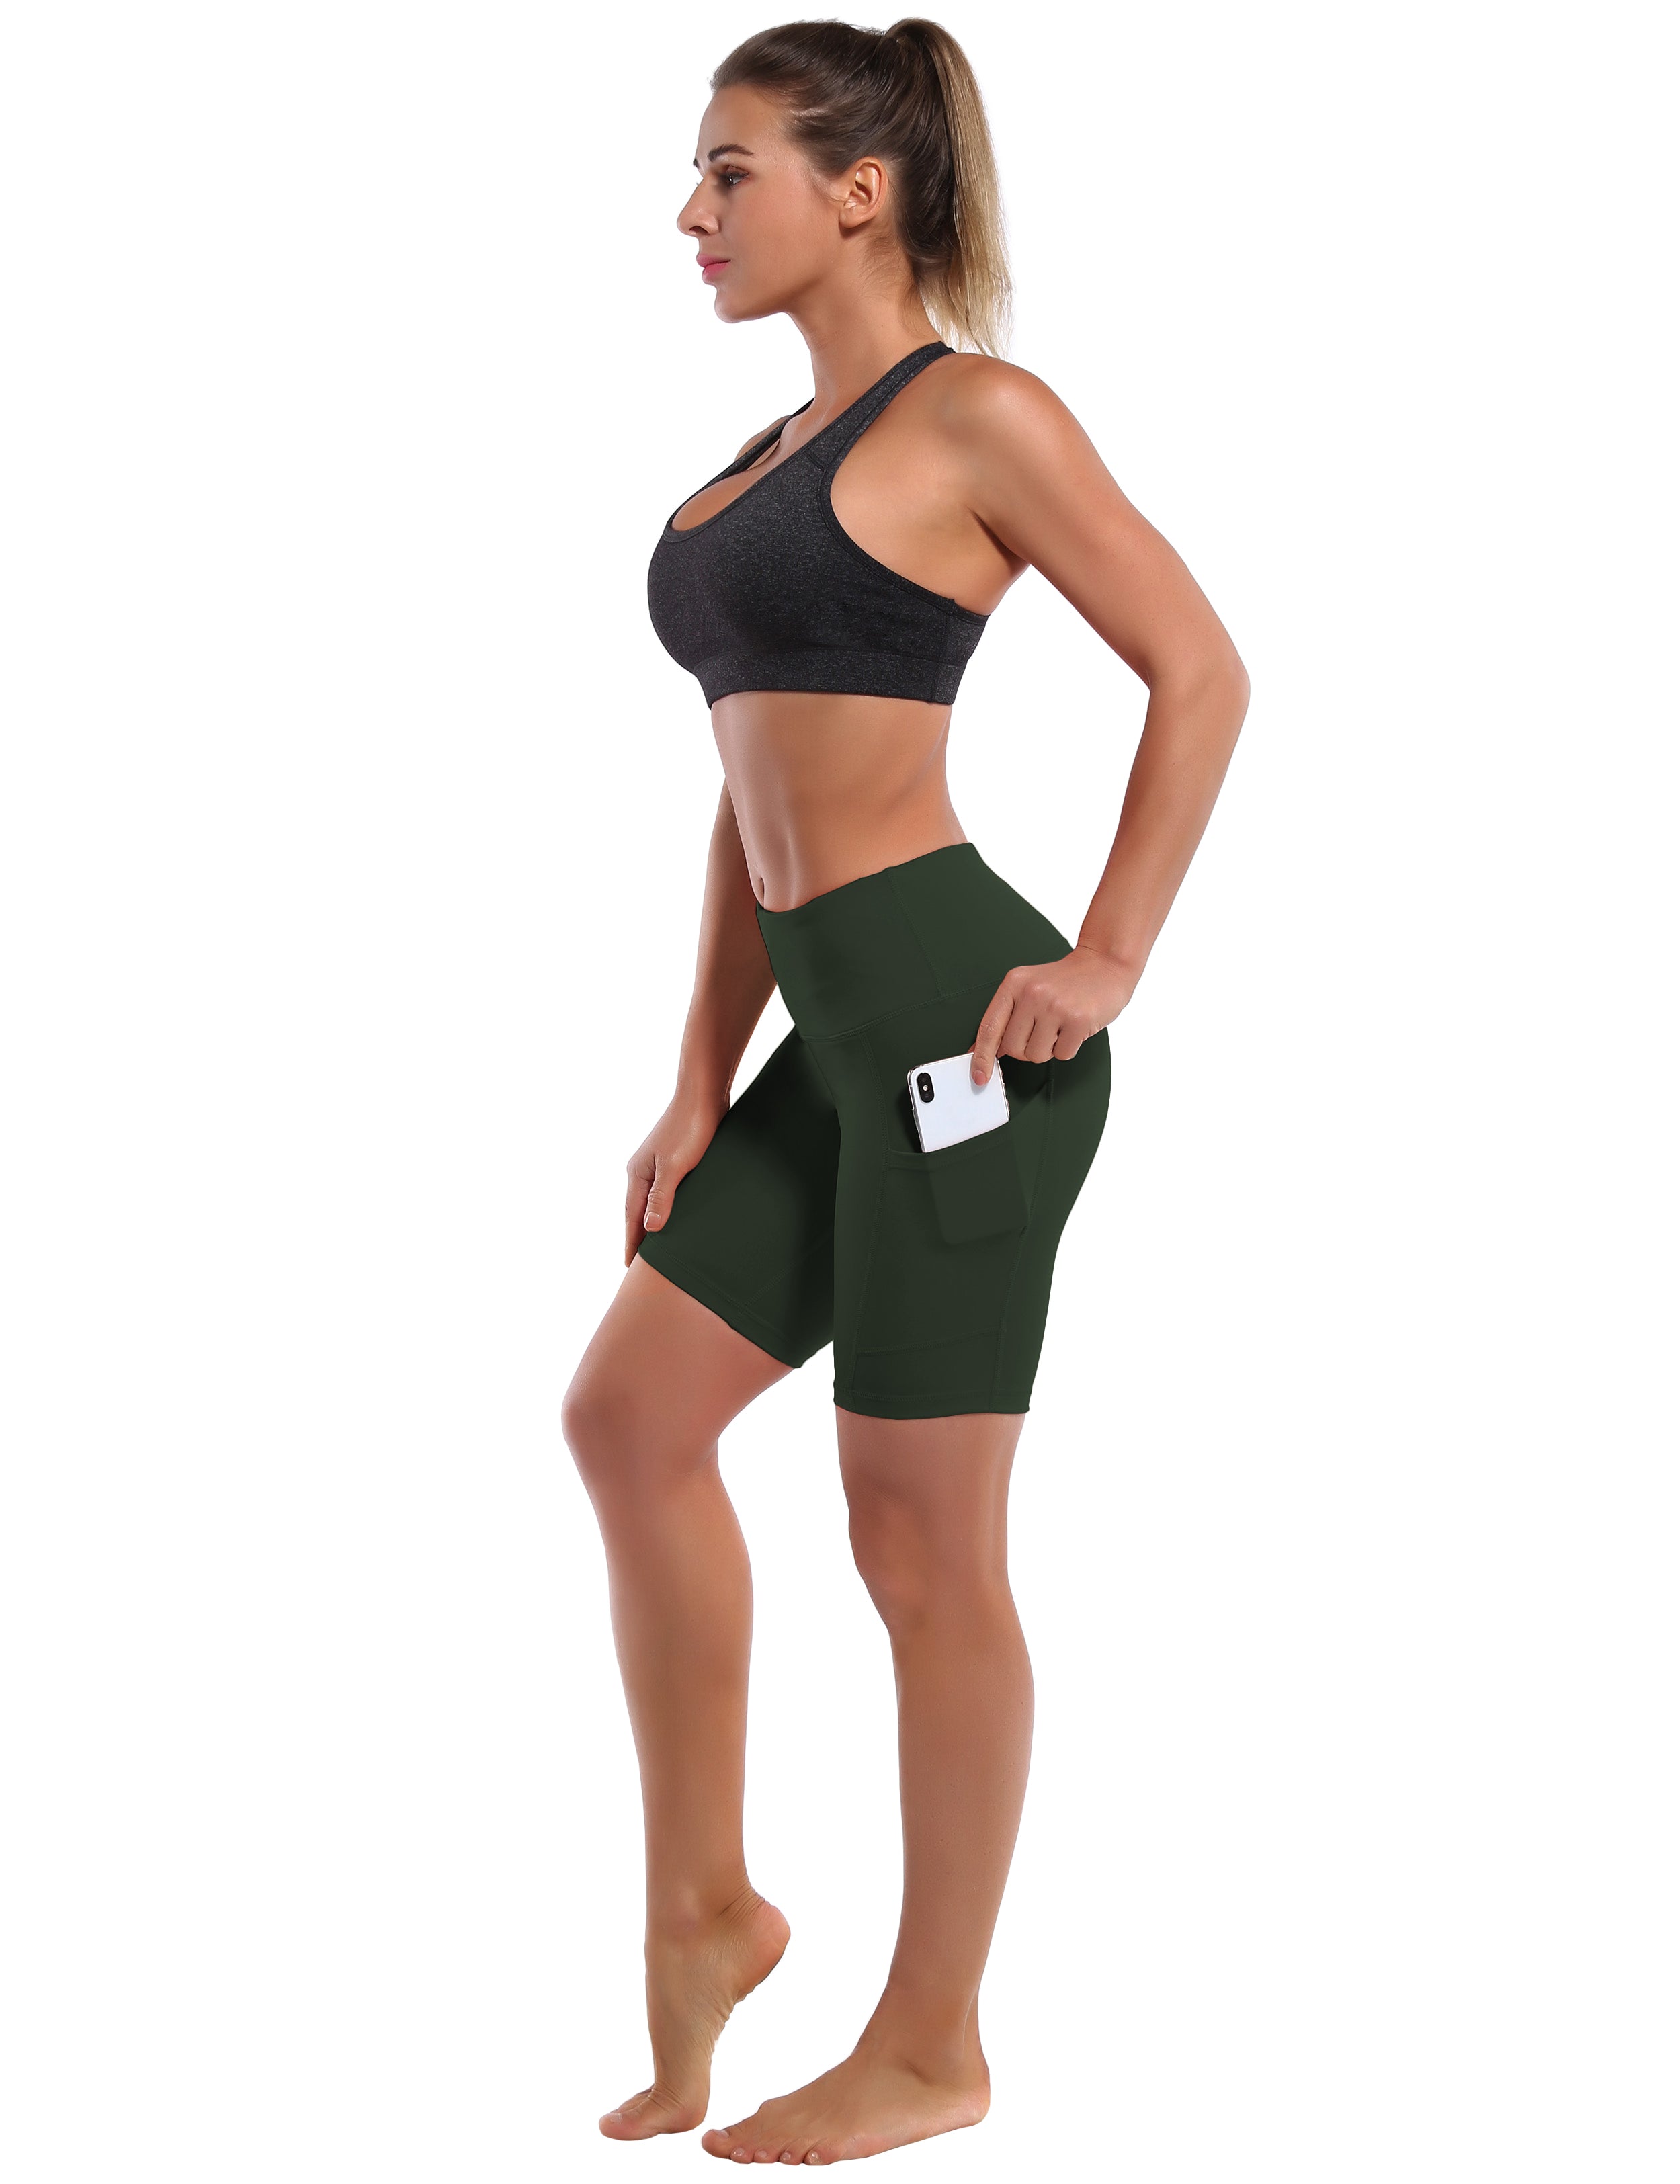 8" Side Pockets Biking Shorts olivegray Sleek, soft, smooth and totally comfortable: our newest style is here. Softest-ever fabric High elasticity High density 4-way stretch Fabric doesn't attract lint easily No see-through Moisture-wicking Machine wash 75% Nylon, 25% Spandex